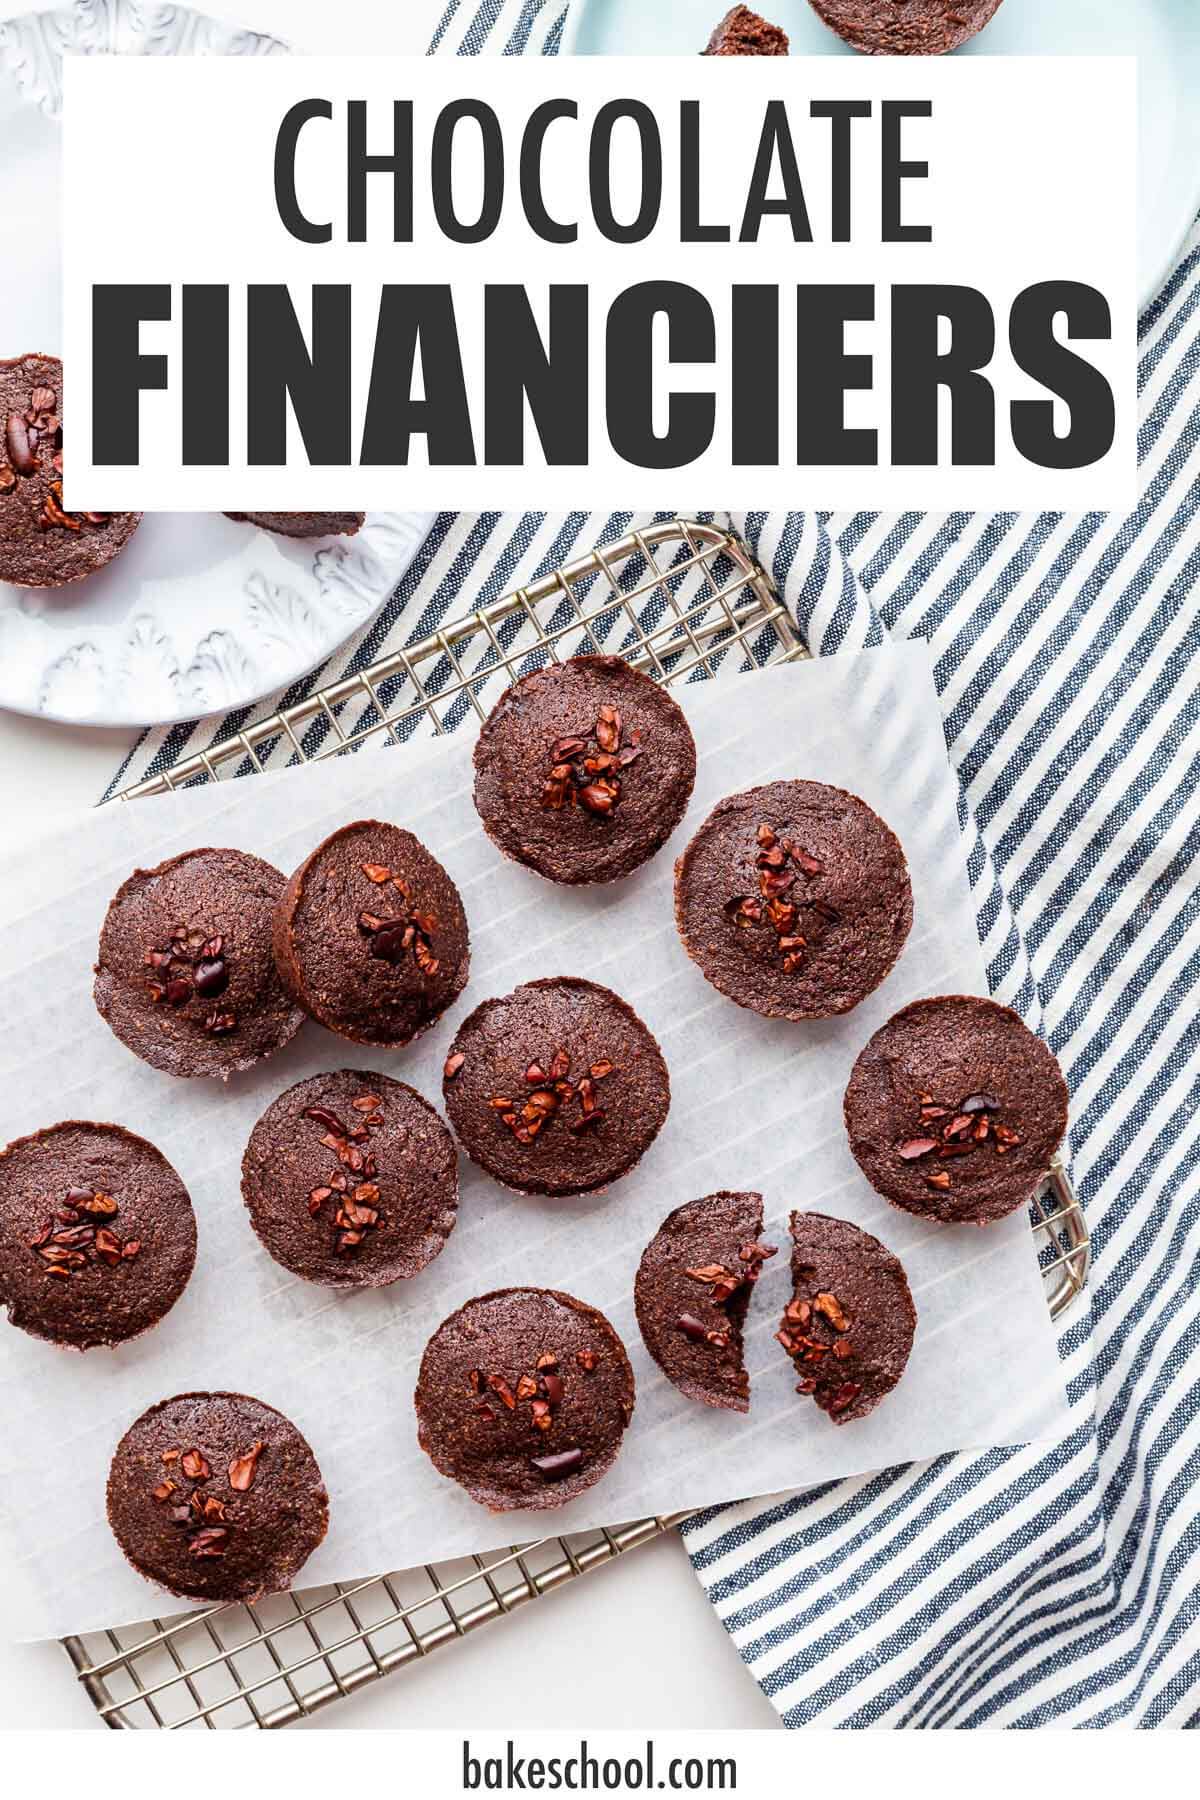 Chocolate financiers on a cooling rack with text overlay that reads "chocolate financiers".